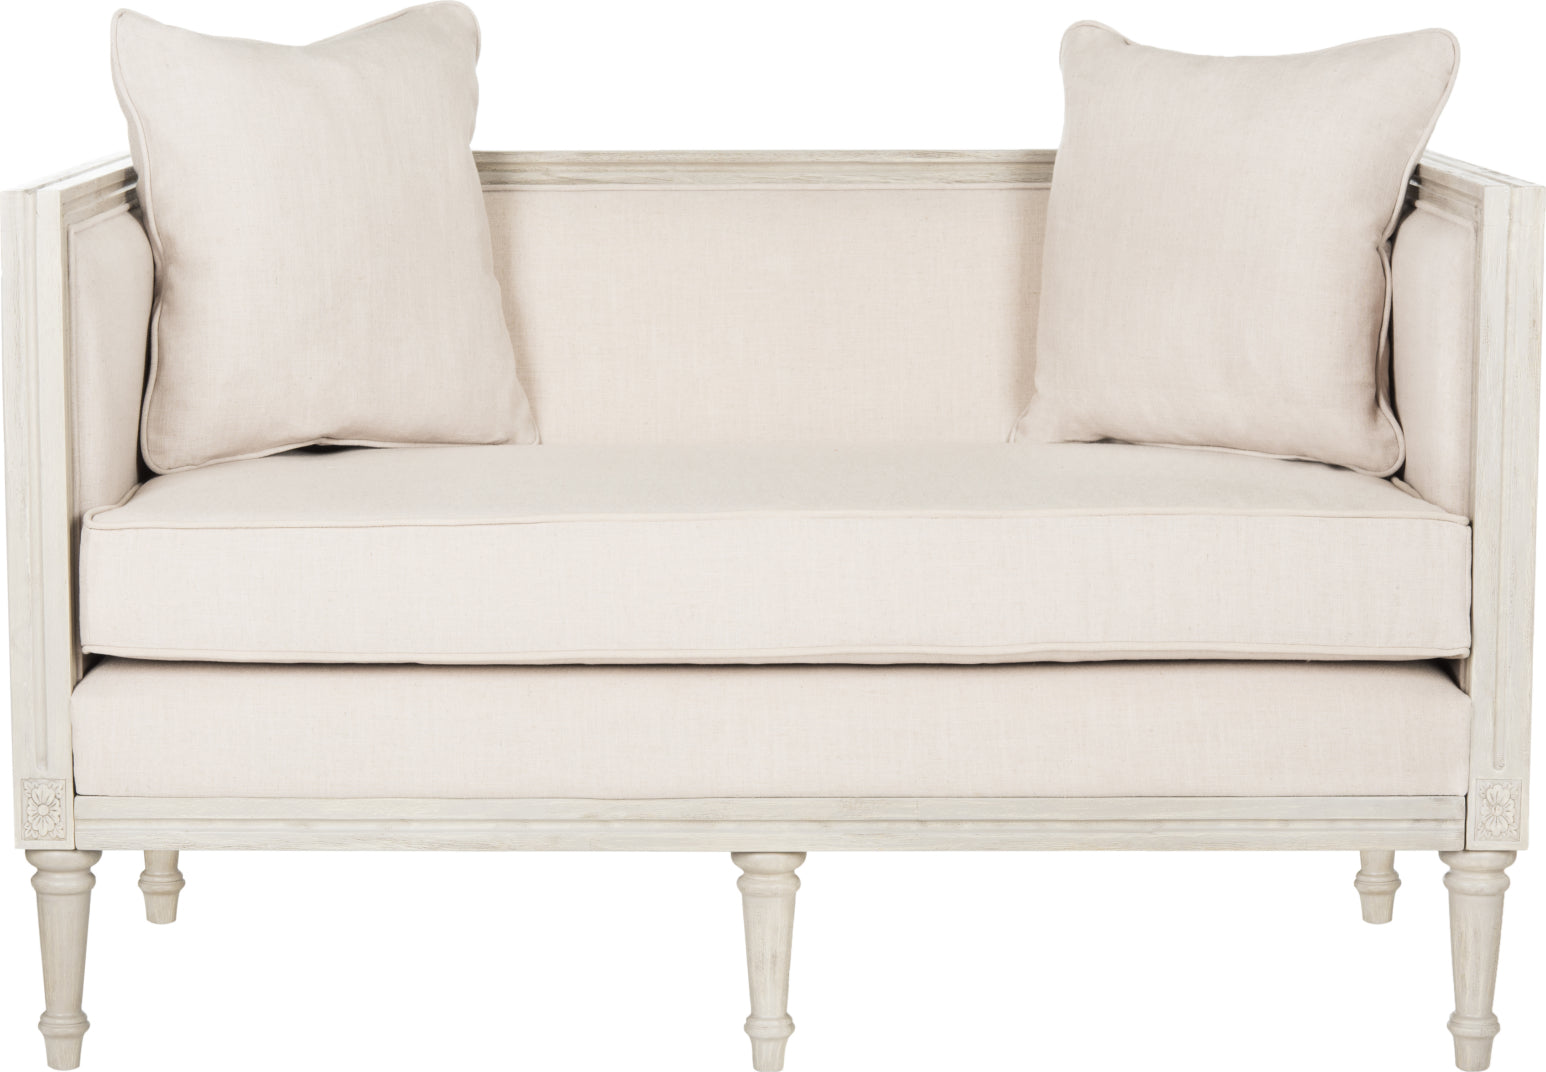 Safavieh Leandra Rustic French Country Settee Beige and Grey Furniture main image